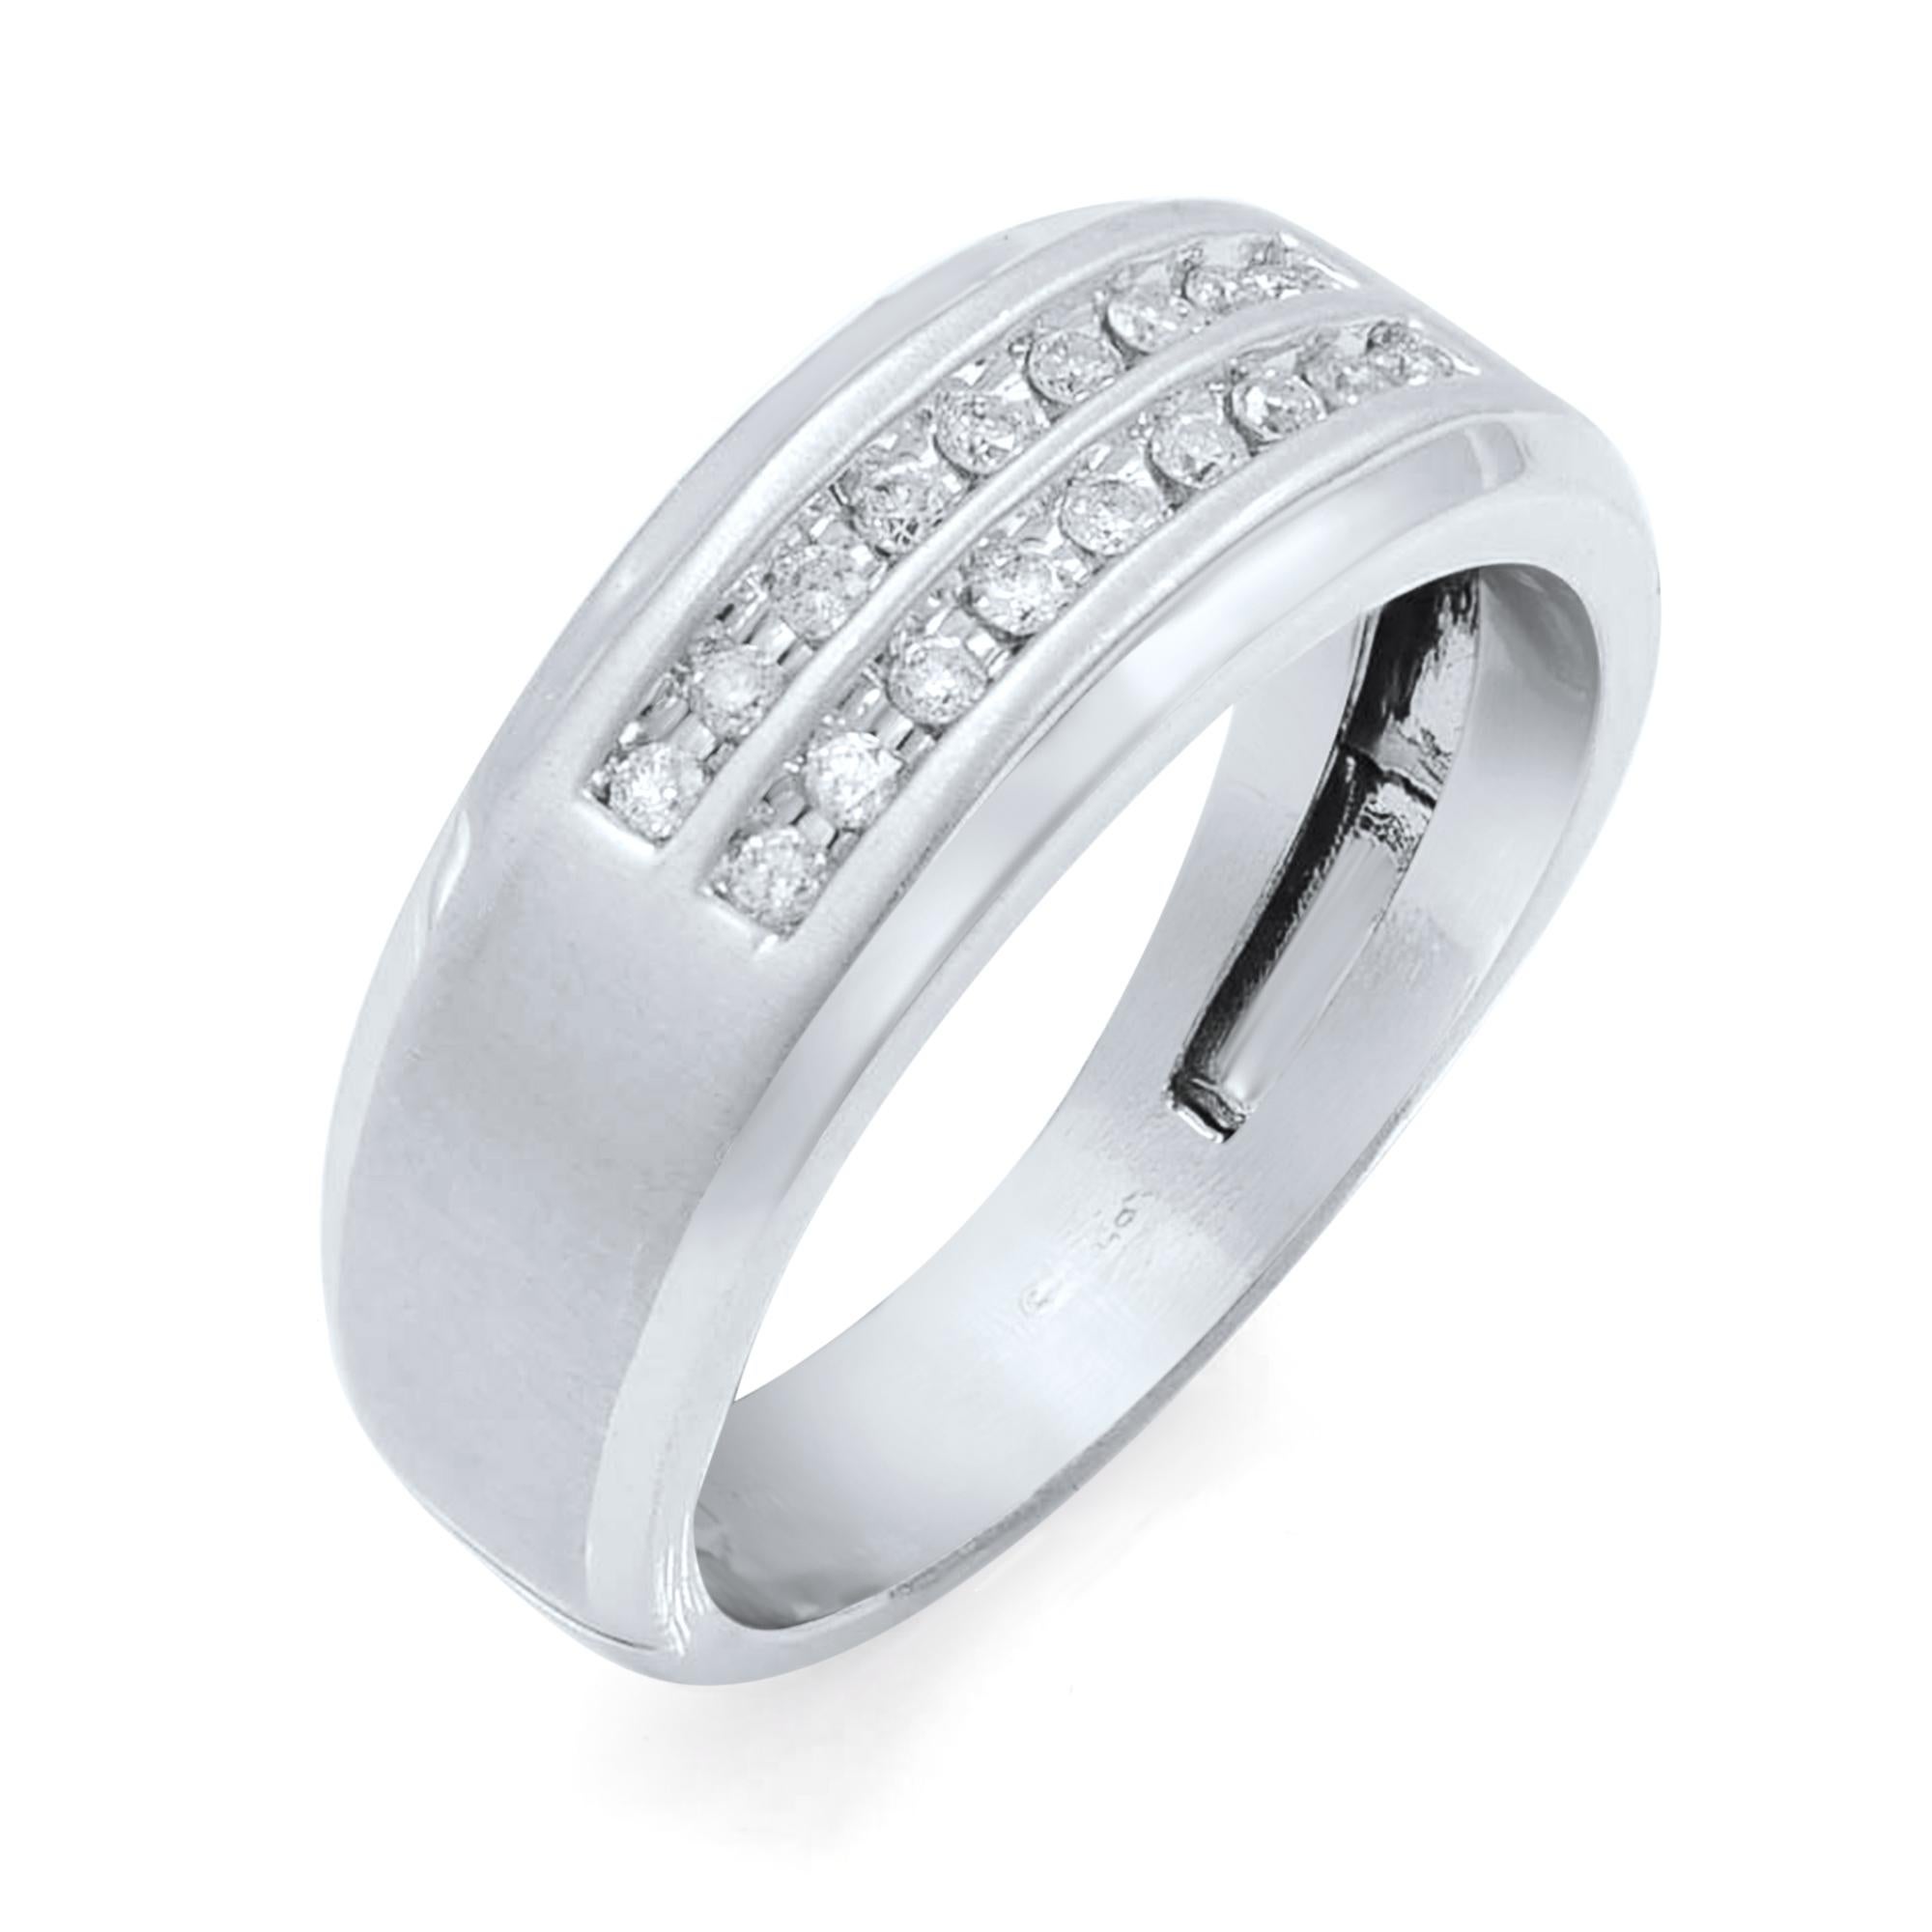 This is a 10K White Gold Mens Diamond Ring. The Total Carat Weight Of the Ring is 0.36 CT Diamond. The Diamonds are Channel Set and are of H-I Color and VS-SI clarity.
The Dimensions of the Ring is Mens: 10 (Can be Sized)
Top Ring Width: